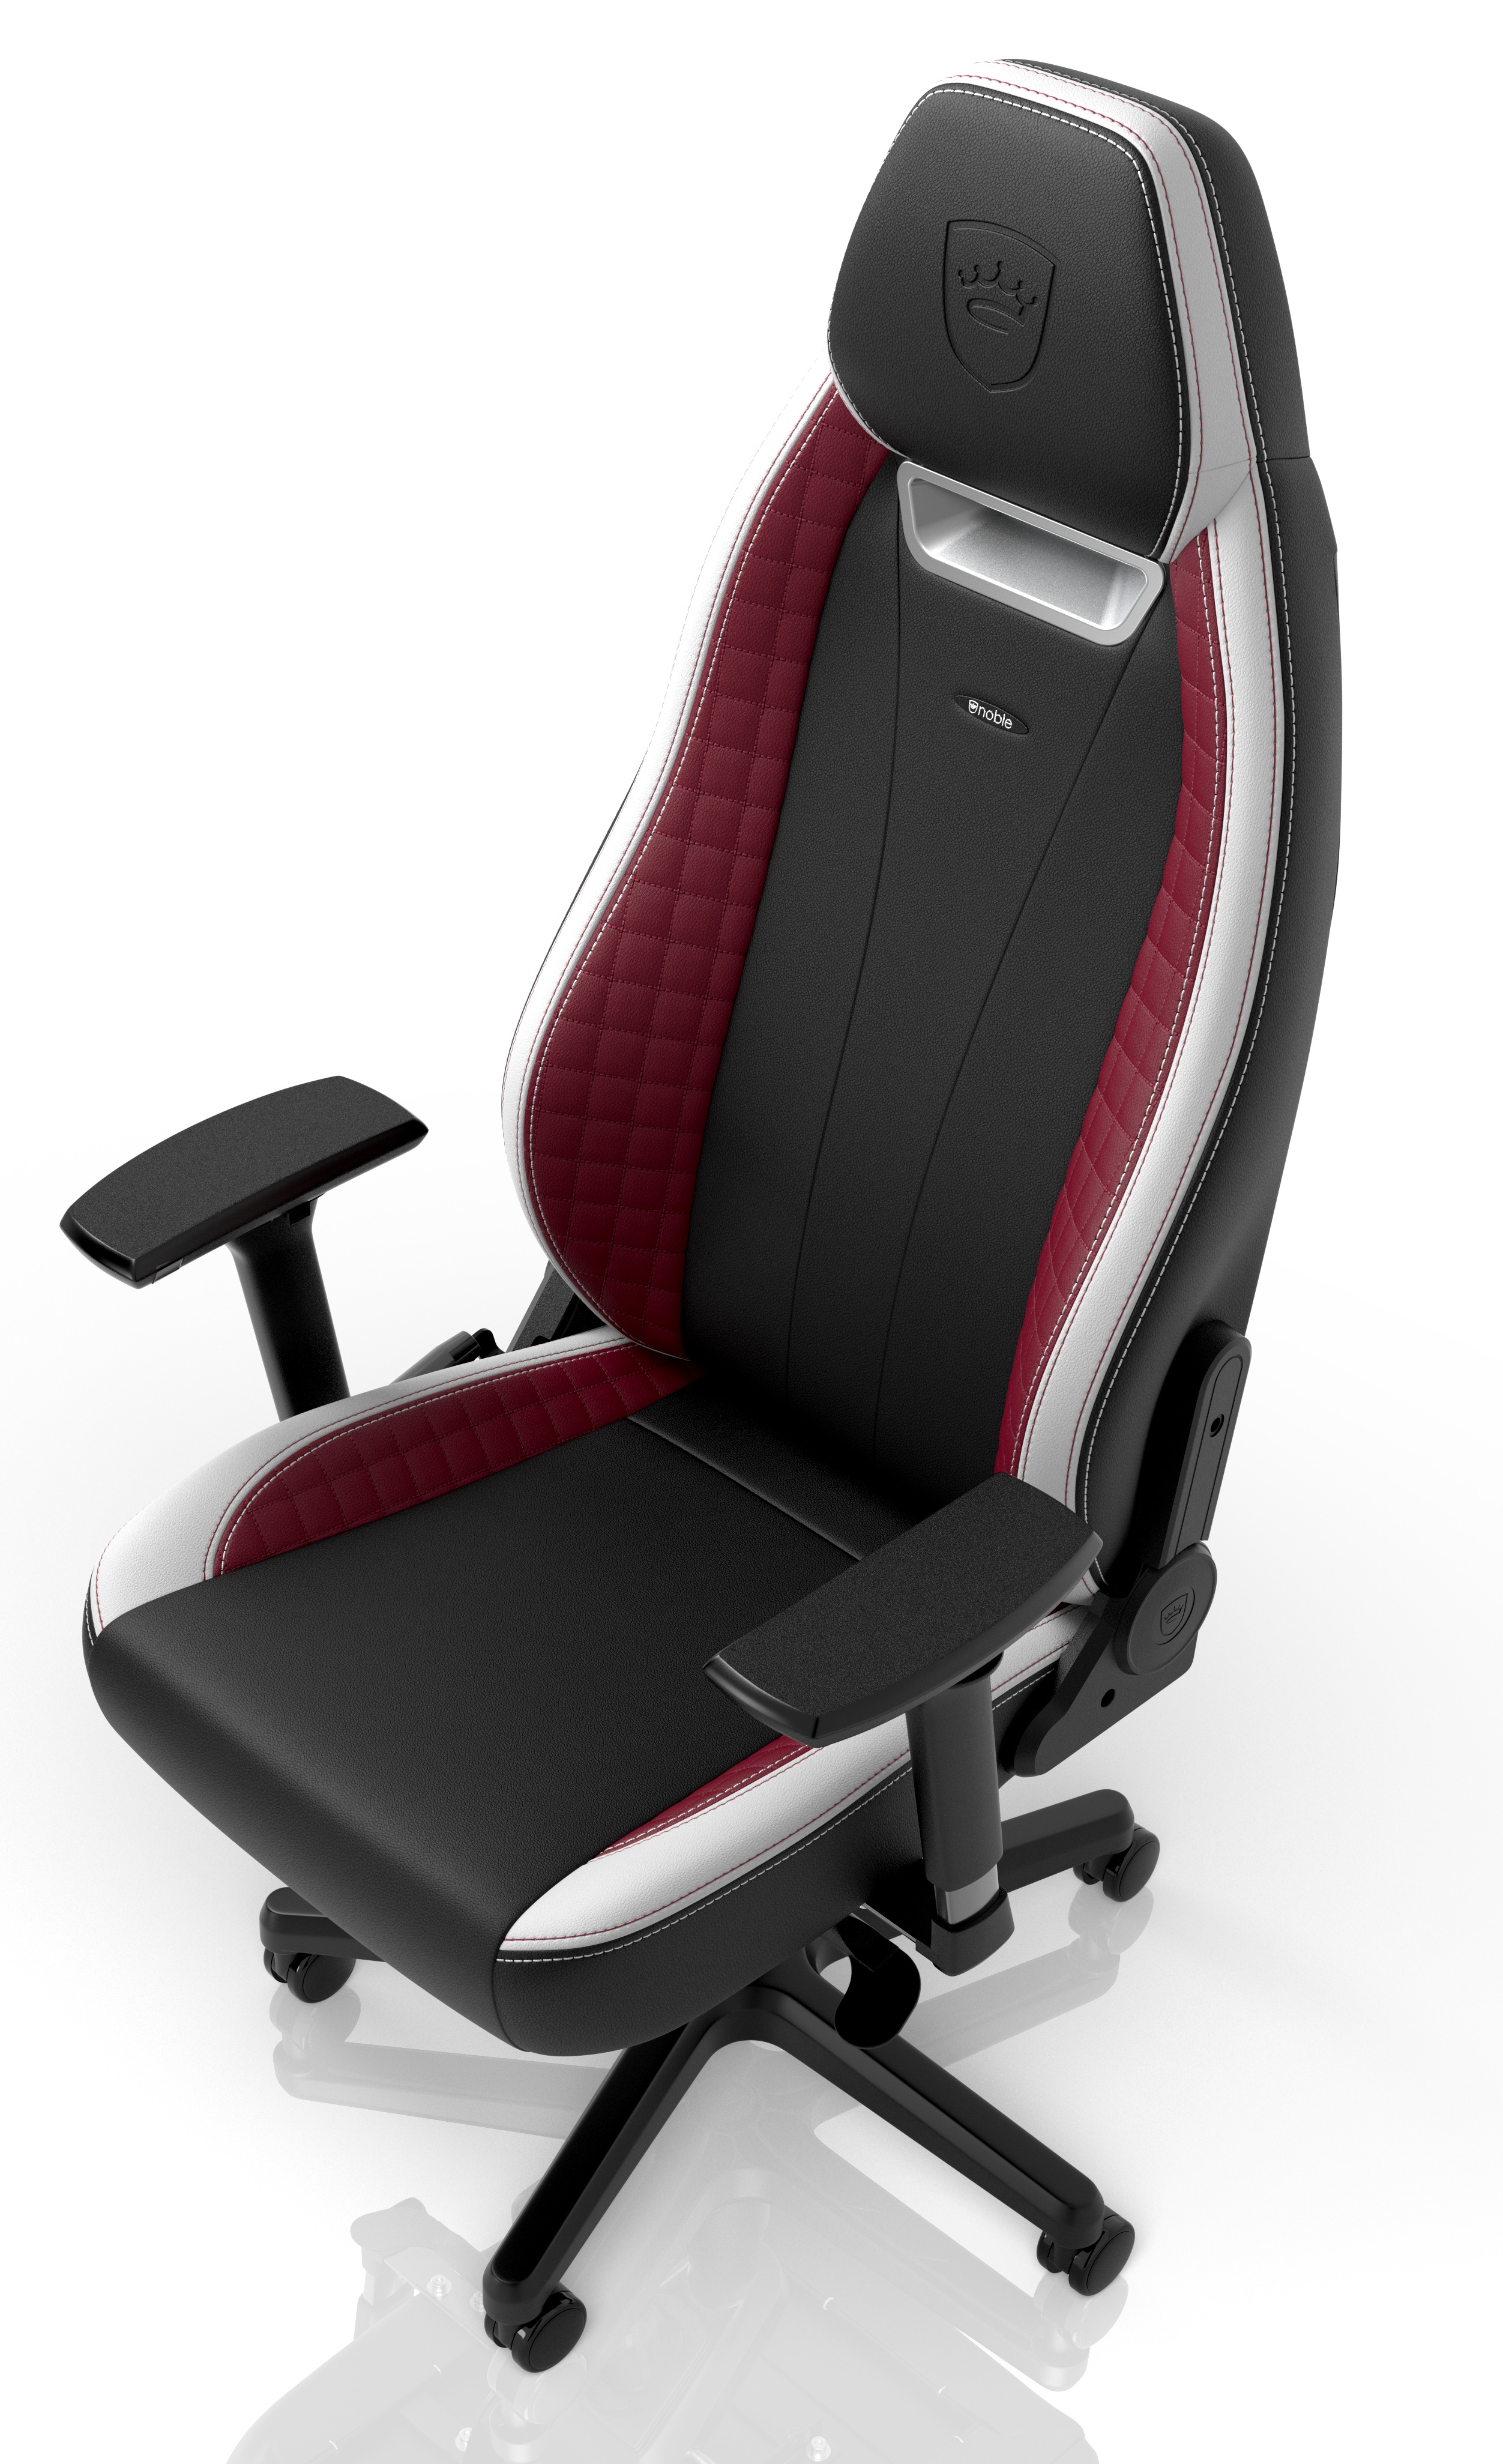 noblechairs - noblechairs LEGEND Gaming Chair Black/White/Red Edition